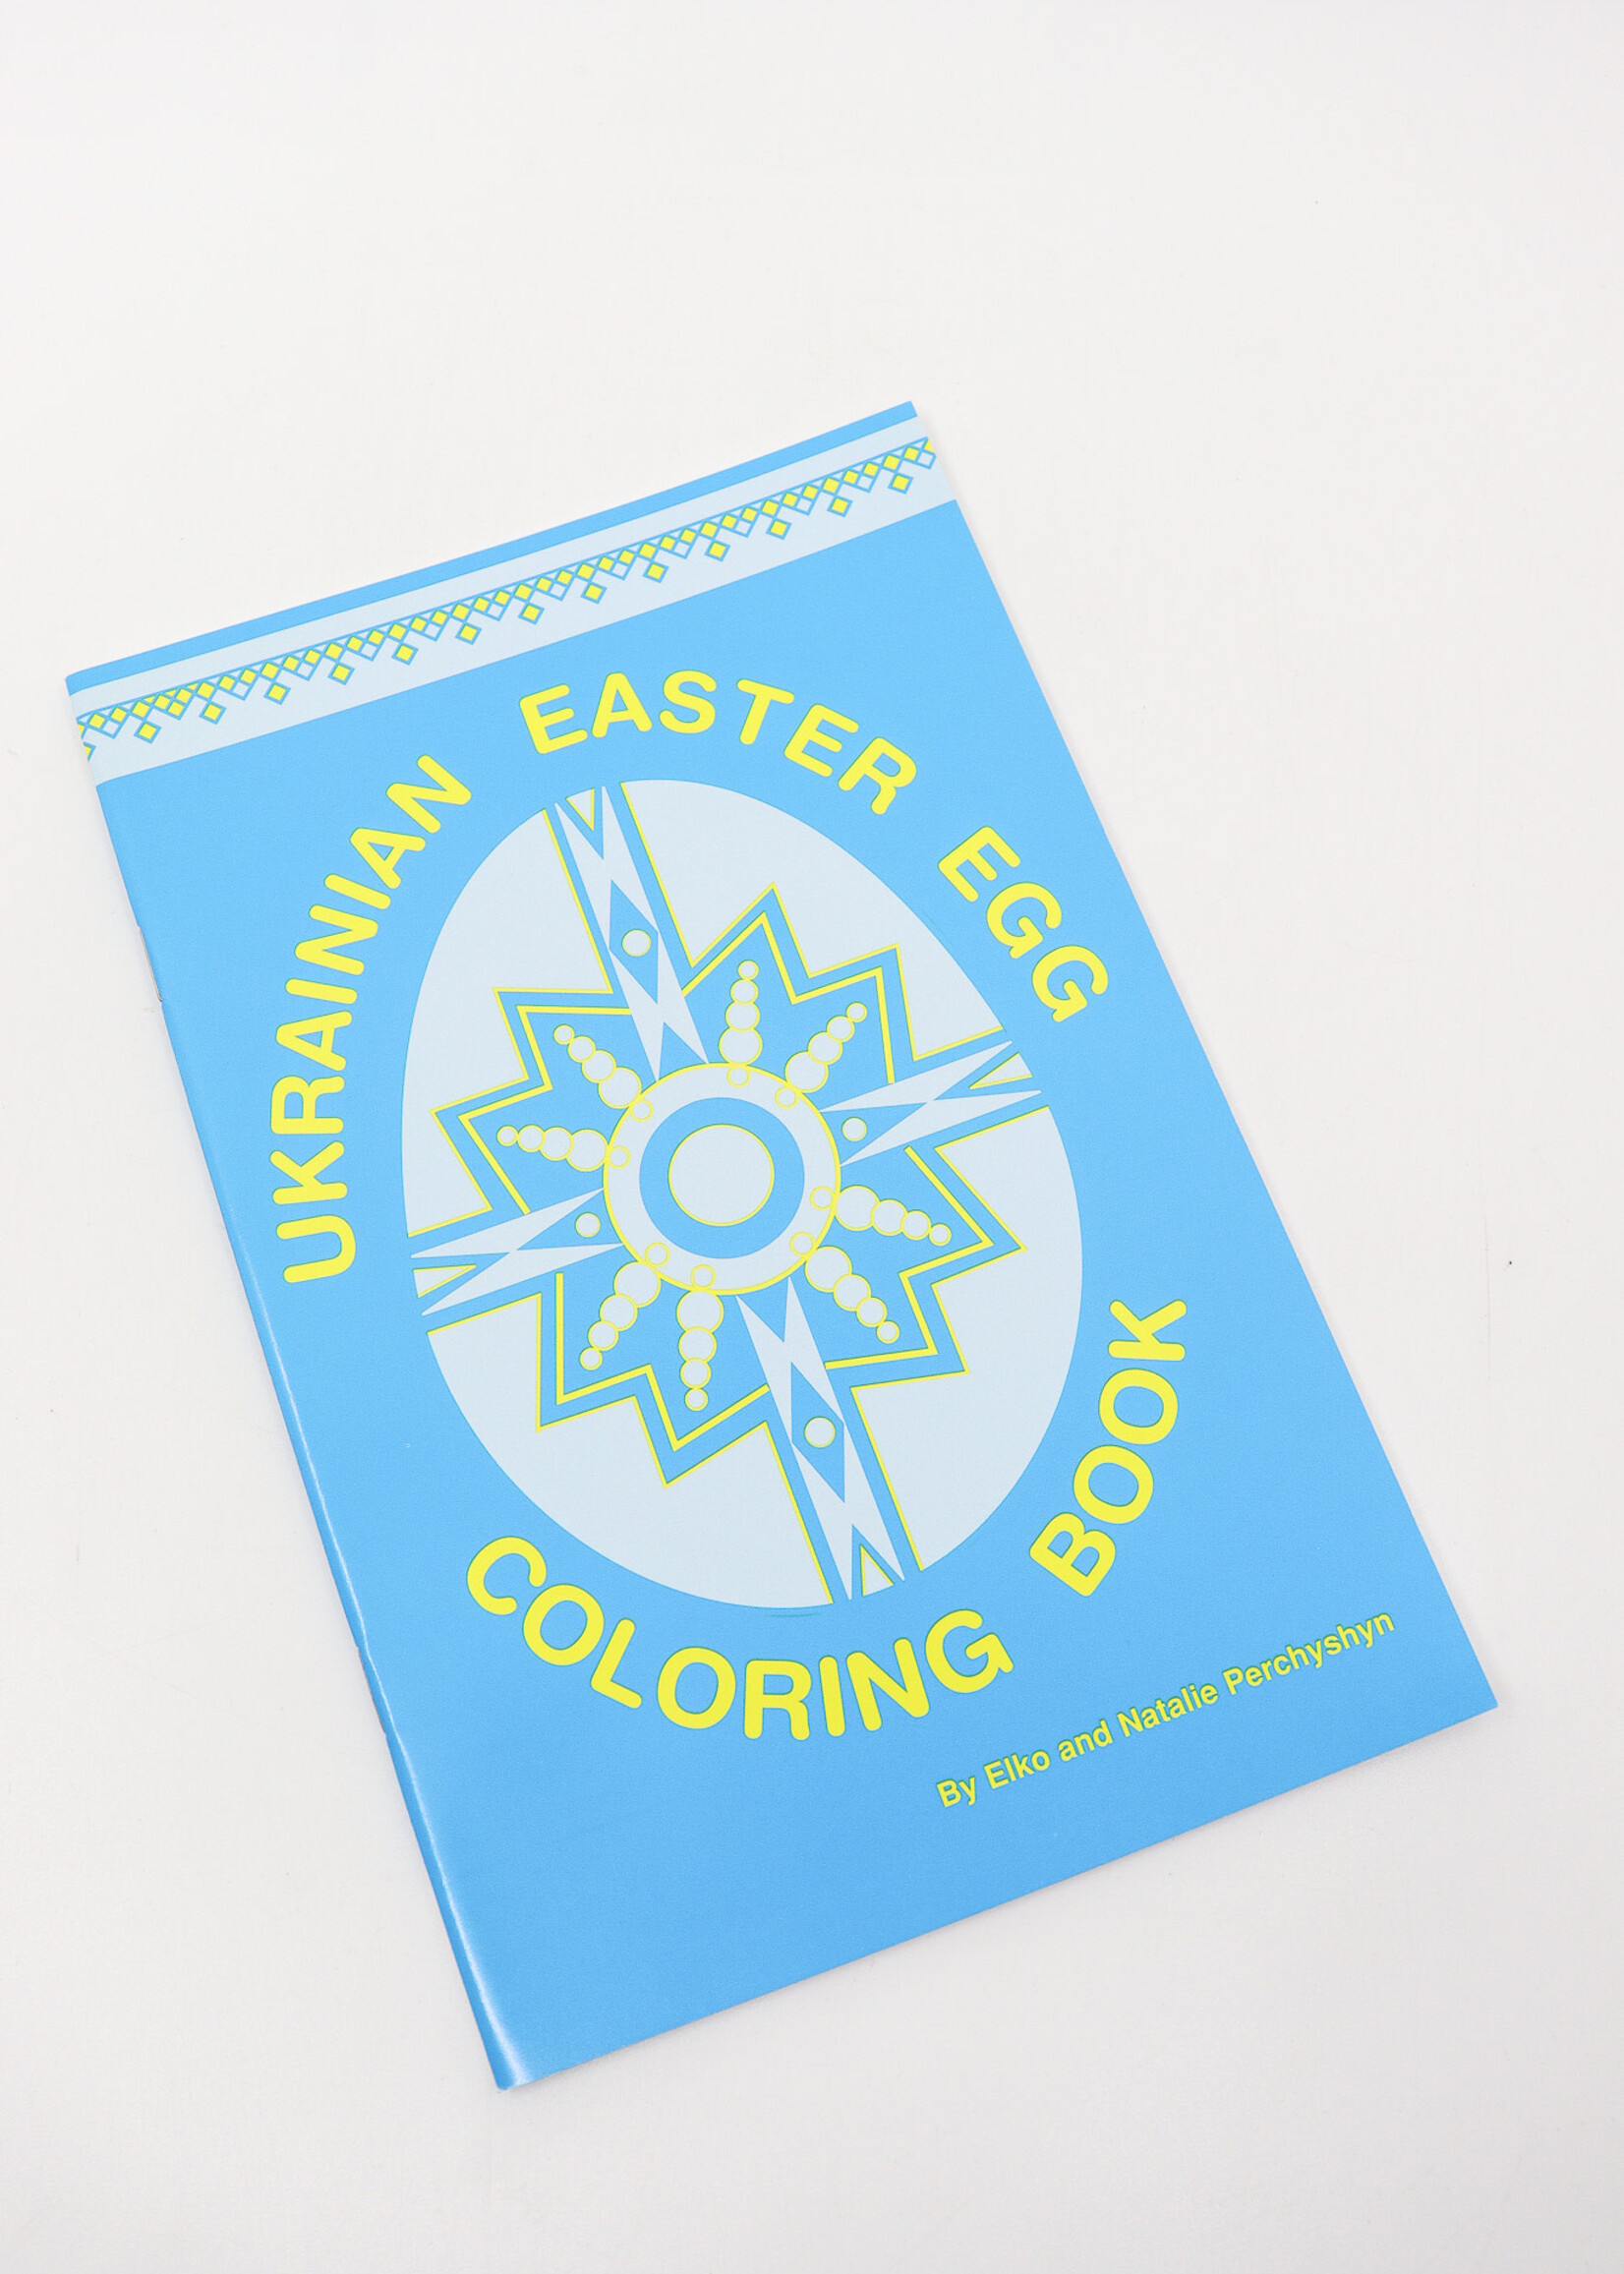 KIDs- Ukrainian Easter Egg, Coloring Book by Elko and Natalie Perchyshyn